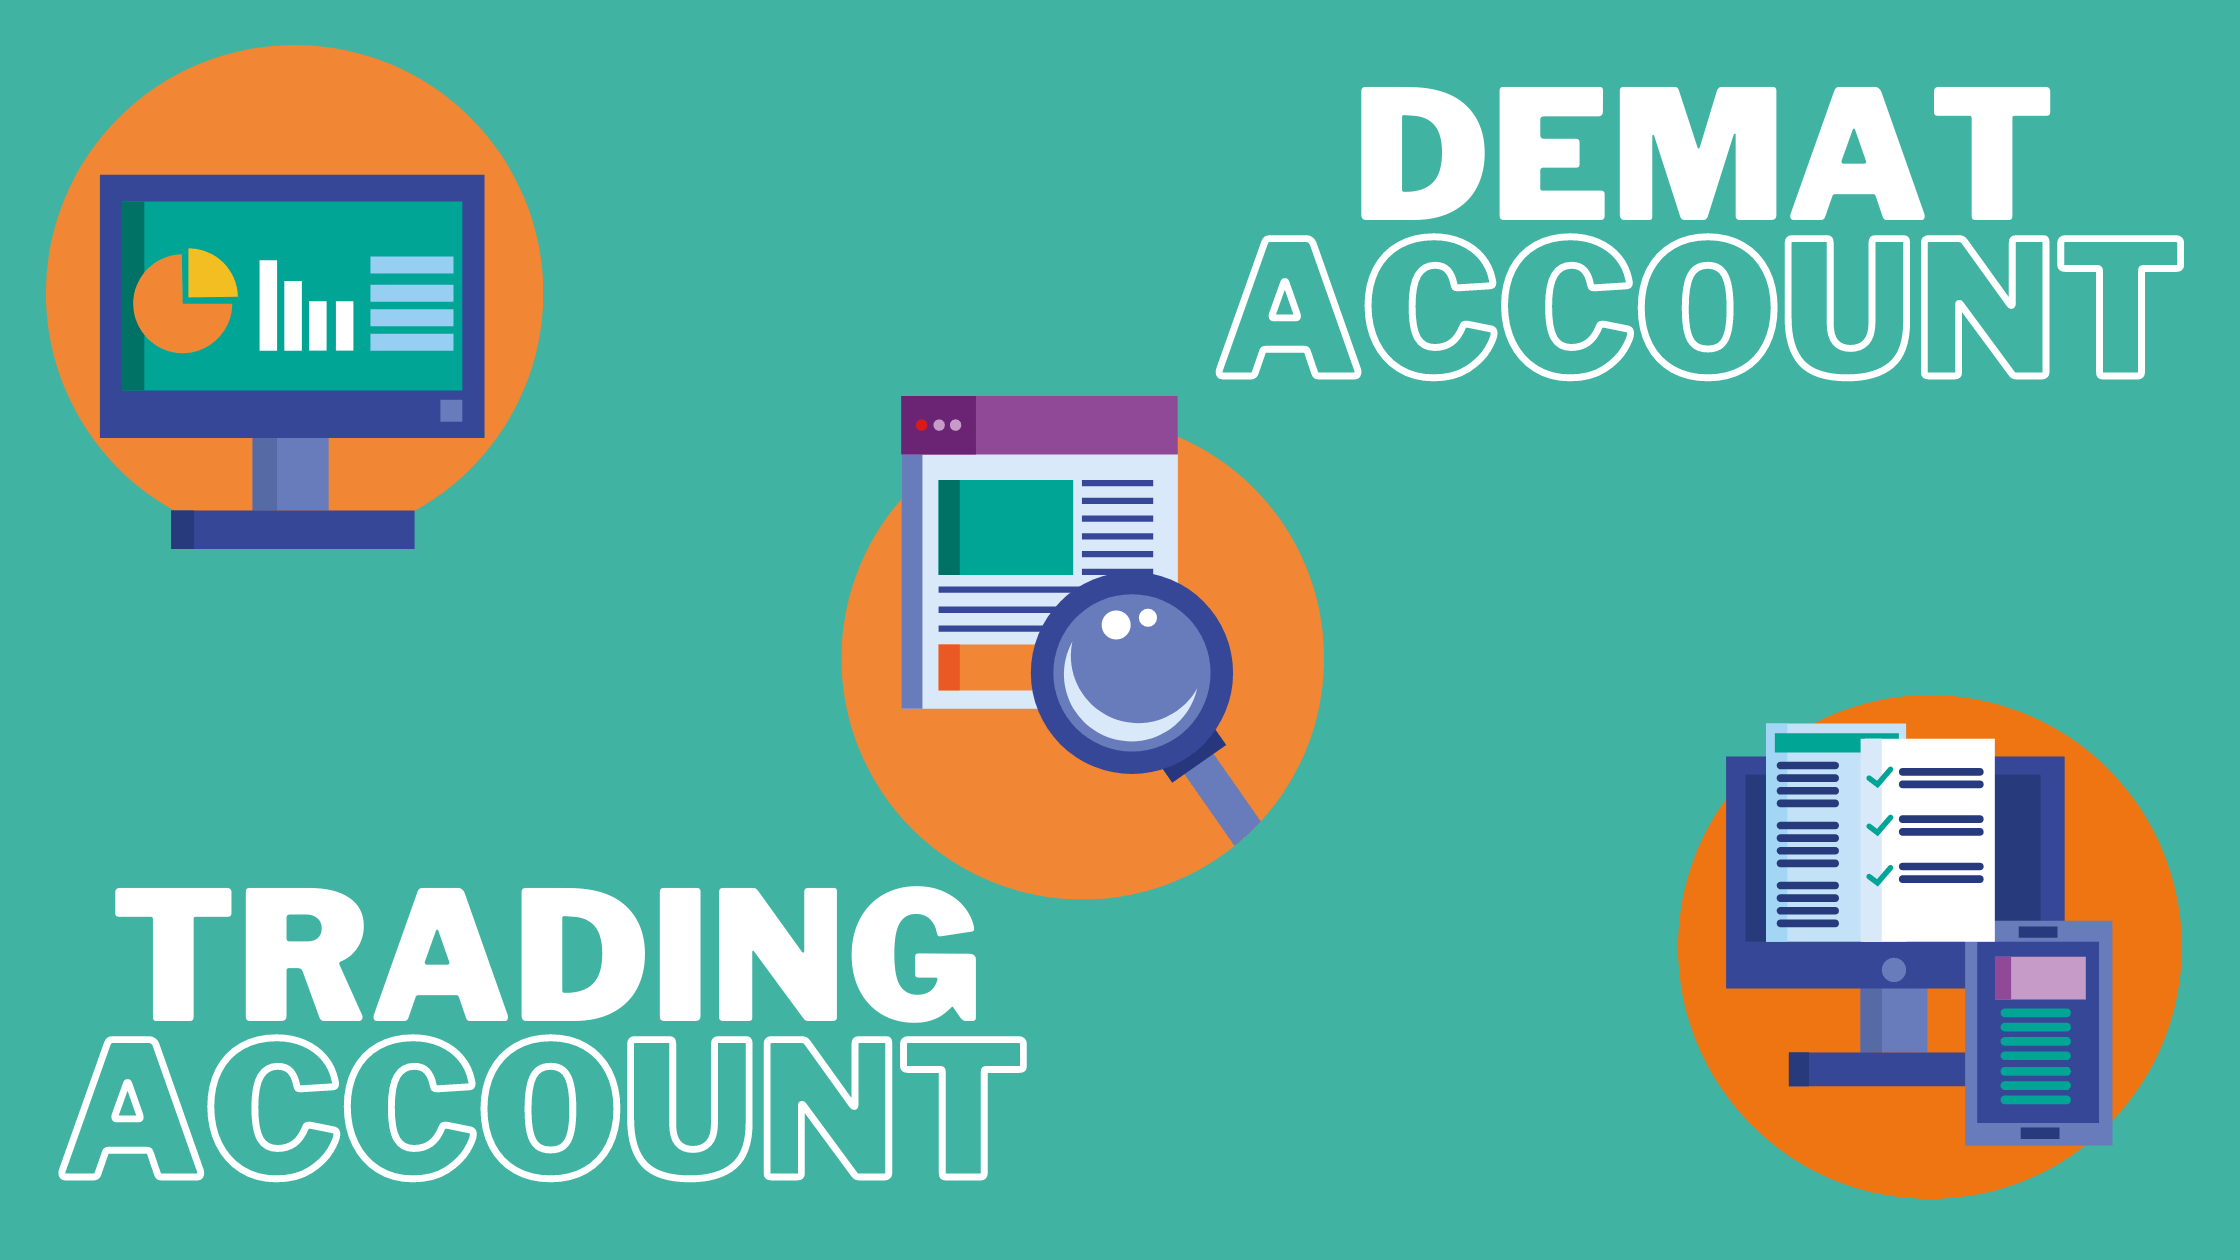 Difference between a Demat and a Trading Account